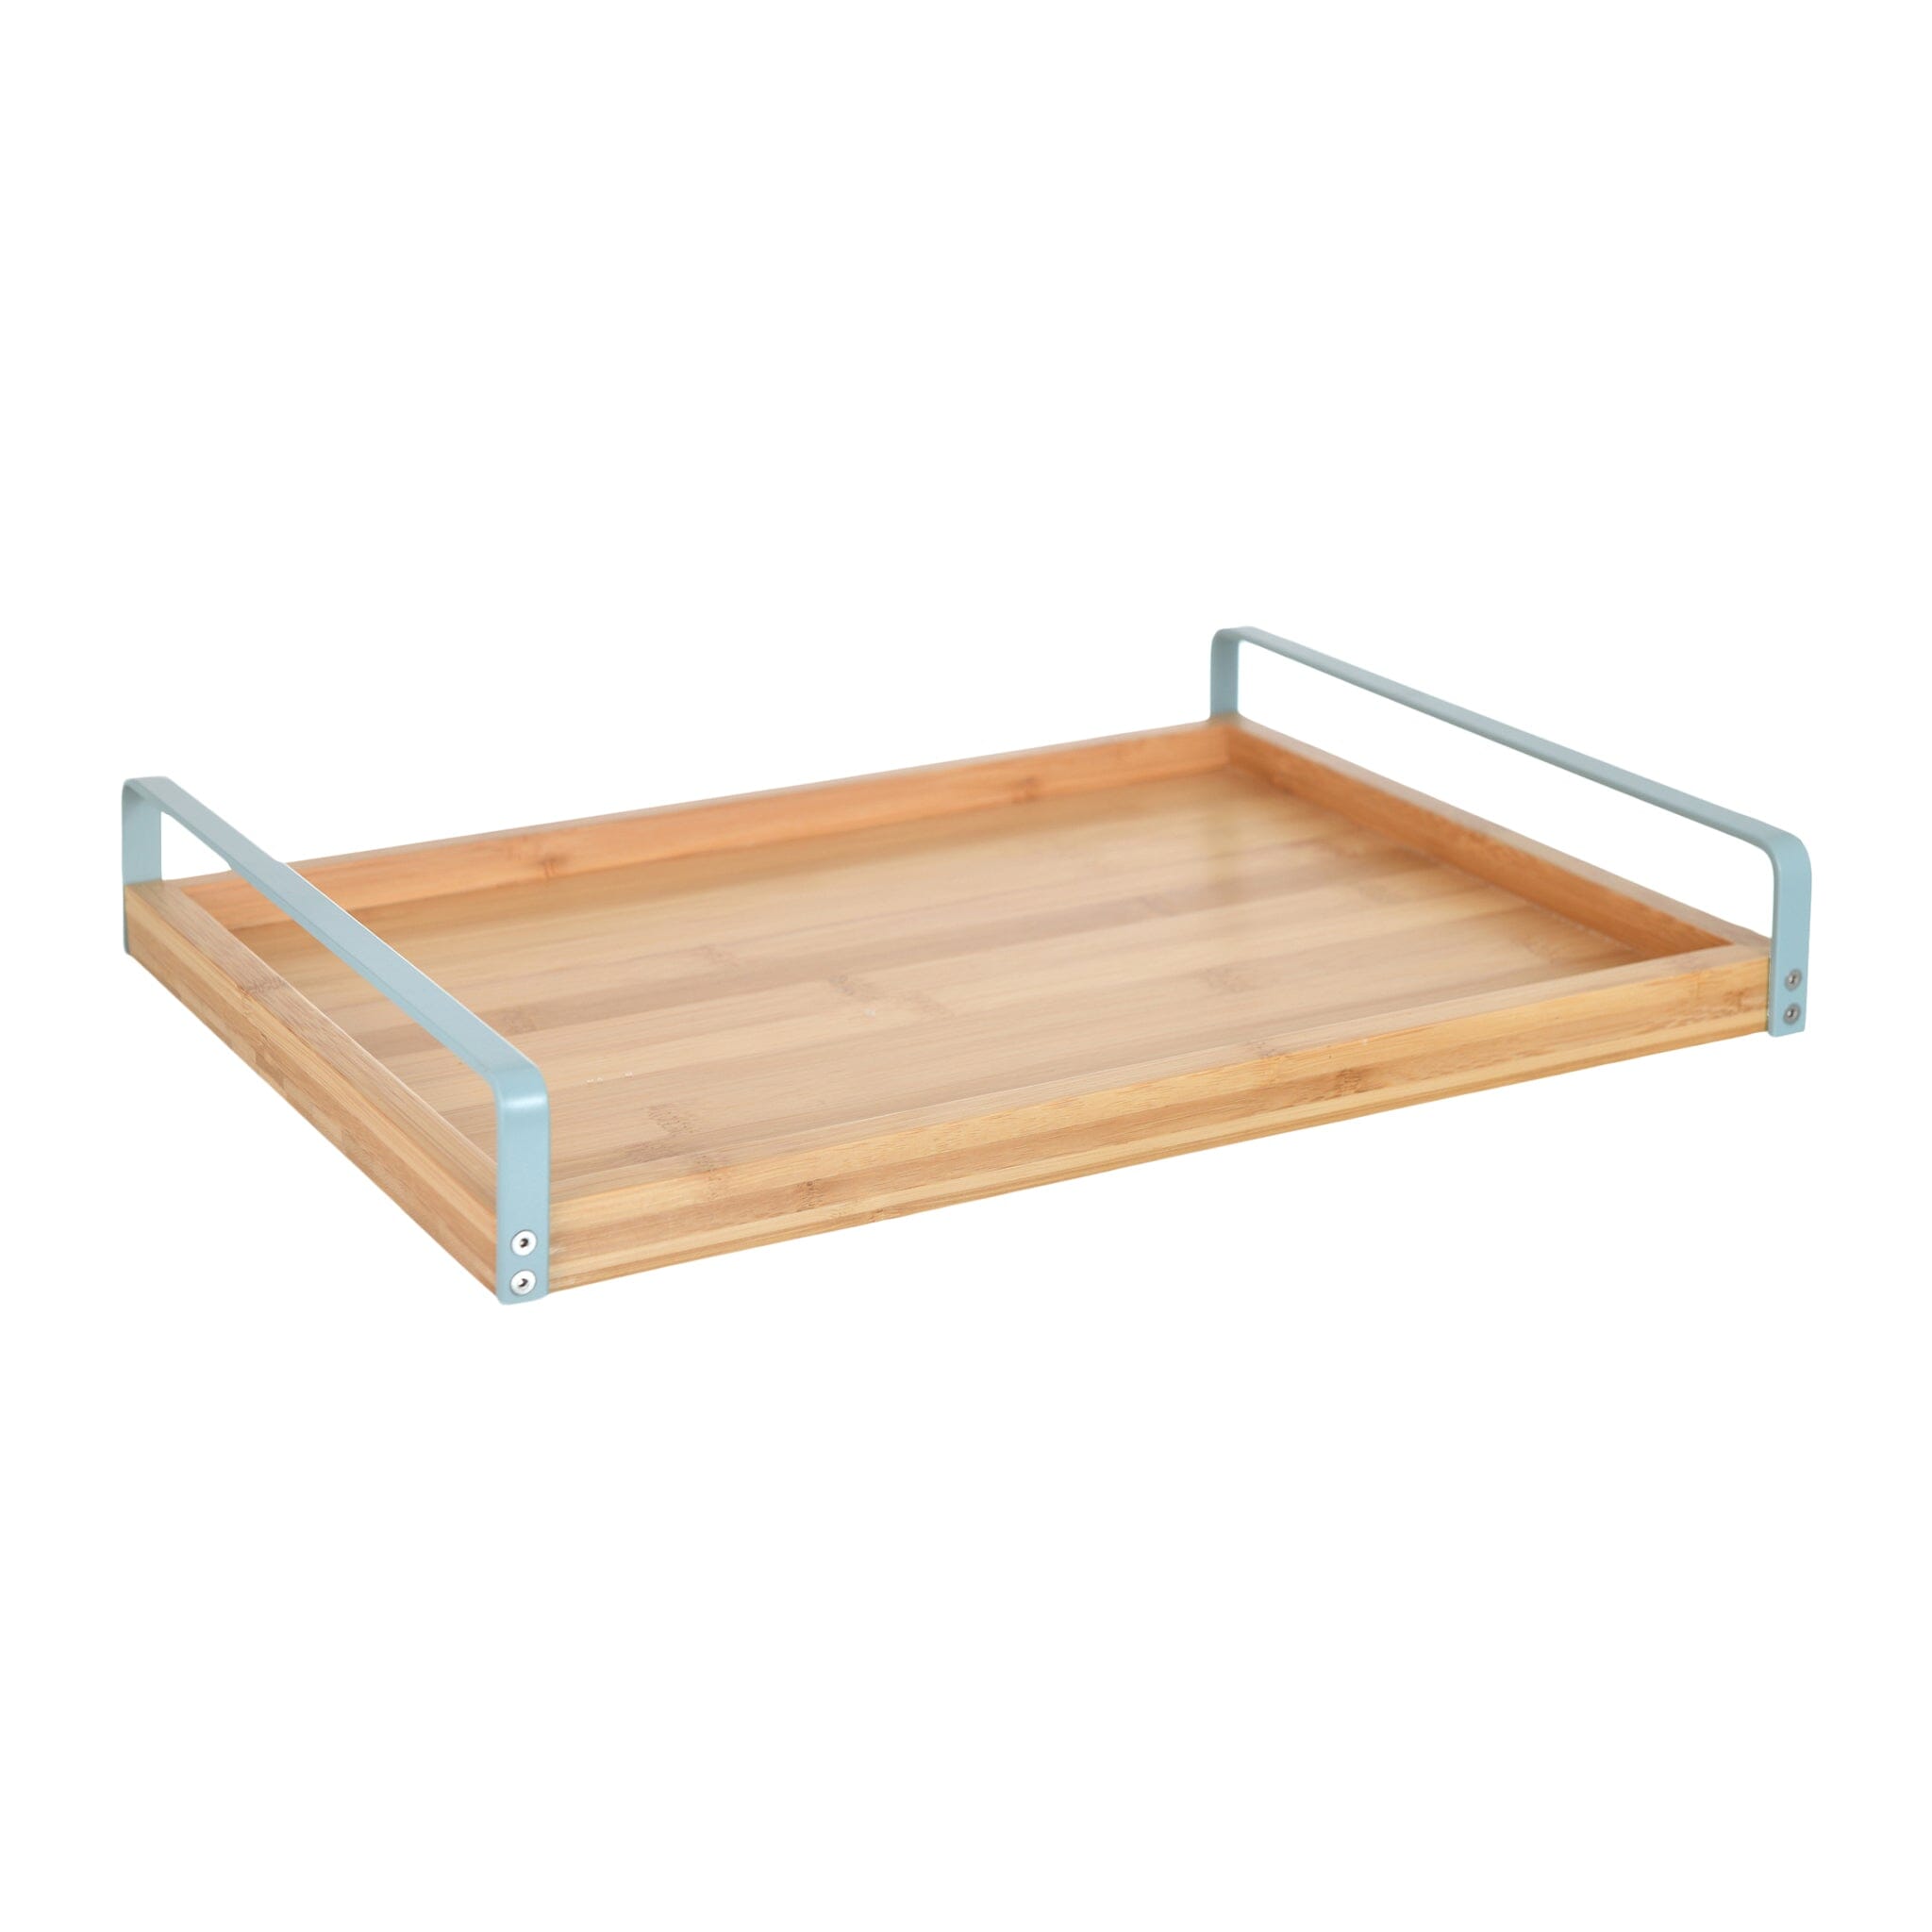 O'lala - Rectangular Wooden Tray With Metal Handle - Light Blue - 28x38cm - 520008173